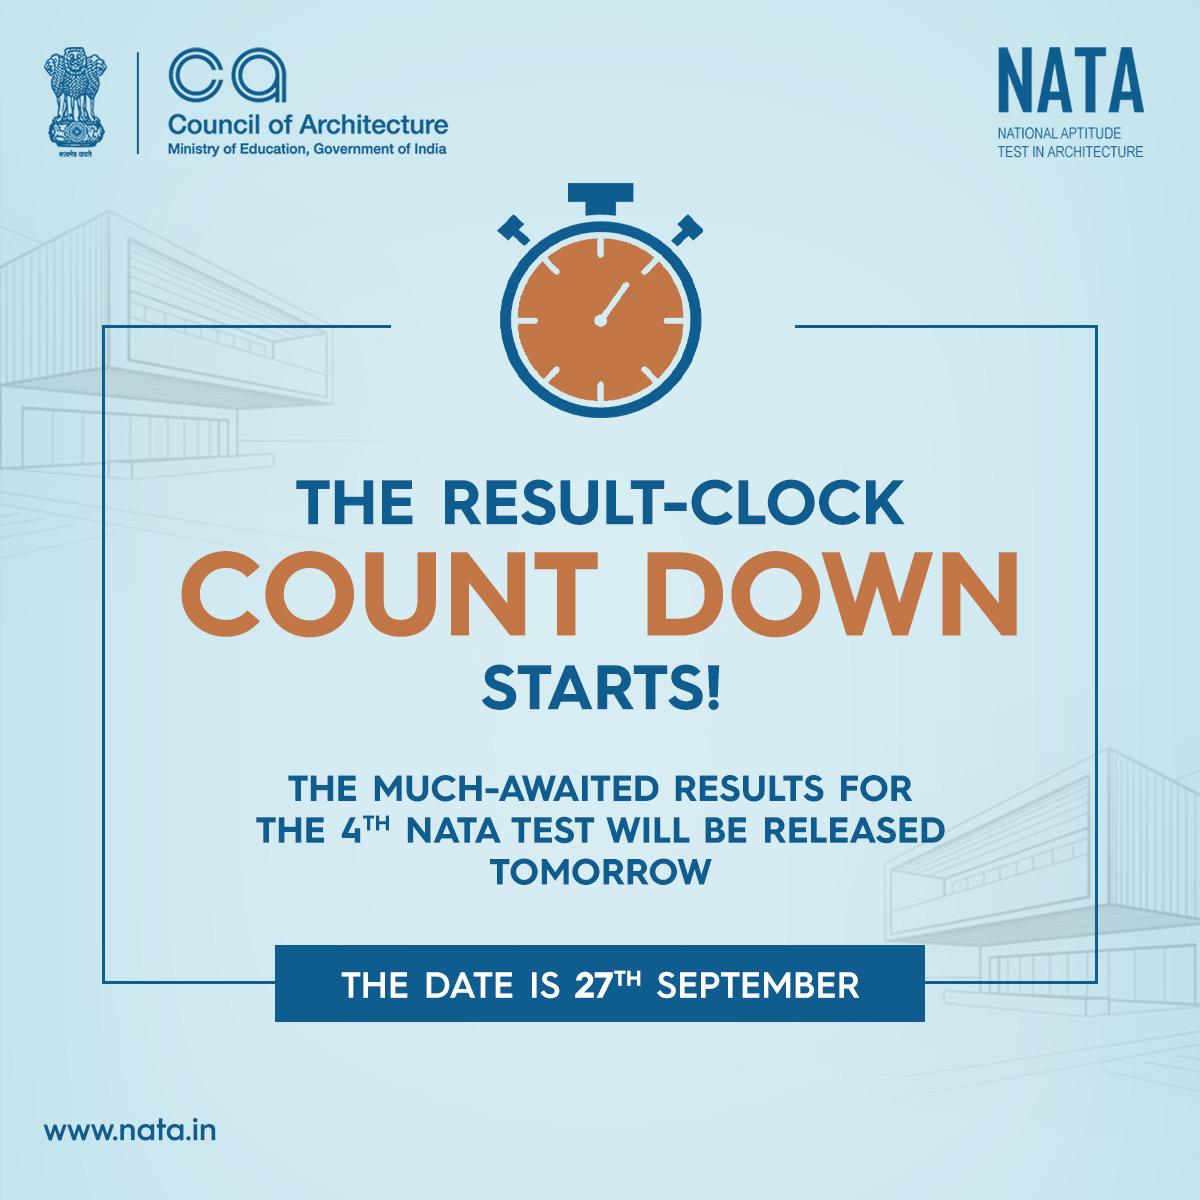 We are thrilled to inform you that the much-anticipated results for the 4th #Natatest will be officially released TOMORROW, on 27th September.

Link in bio!
#nataregistration #nata2023
#nataexam #NATAresults #nataentrance #COA #nataaspiration #resultcountdown #designinspiration